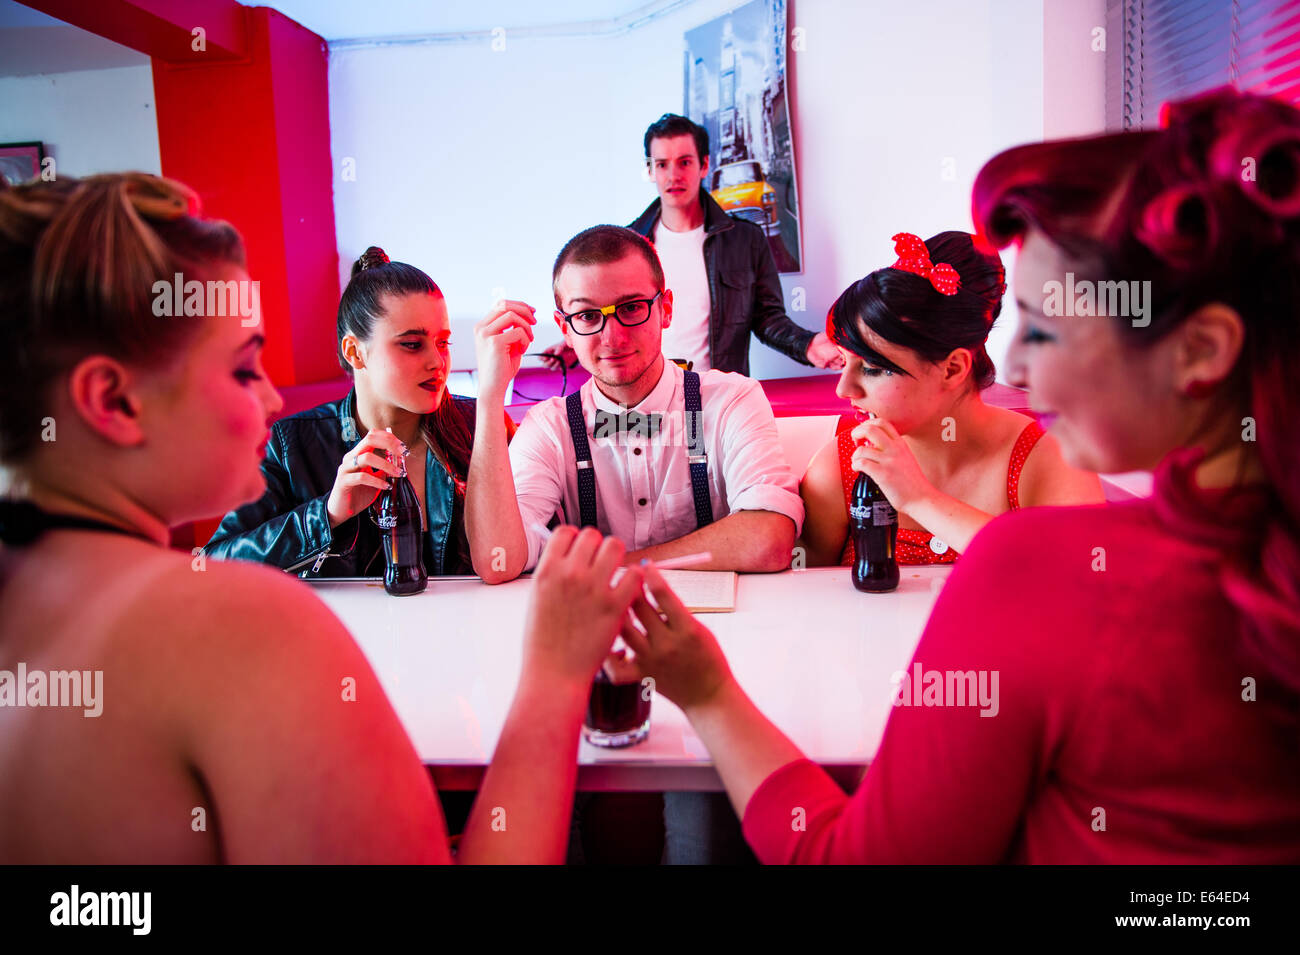 A geek geeky man dressed in 1950's style American clothing fashion in a diner with four women Stock Photo